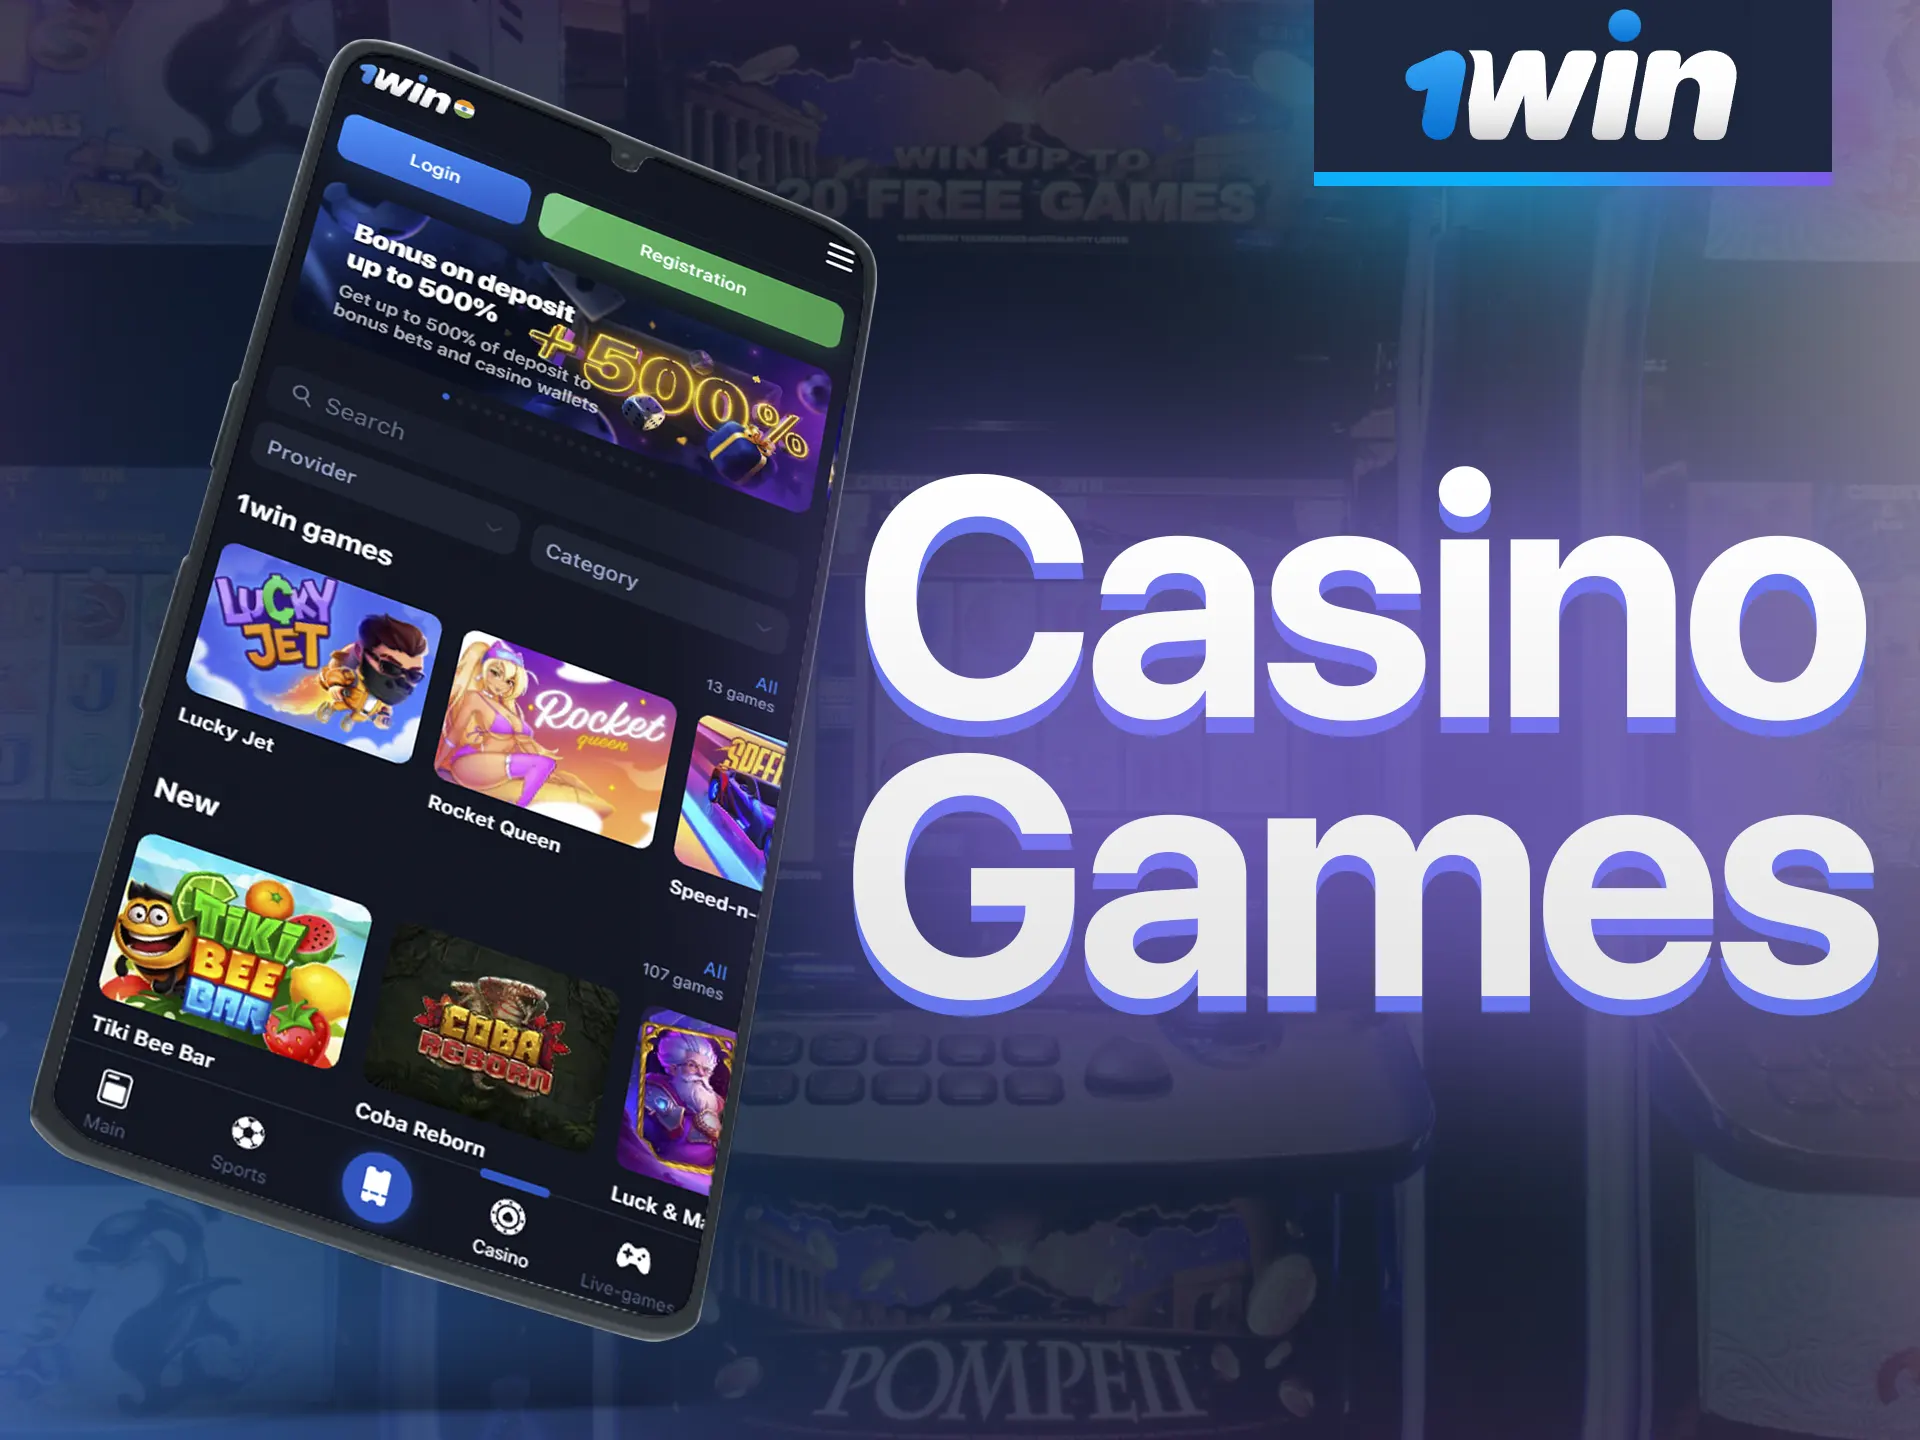 1win app offers a wide range of casino games to players.